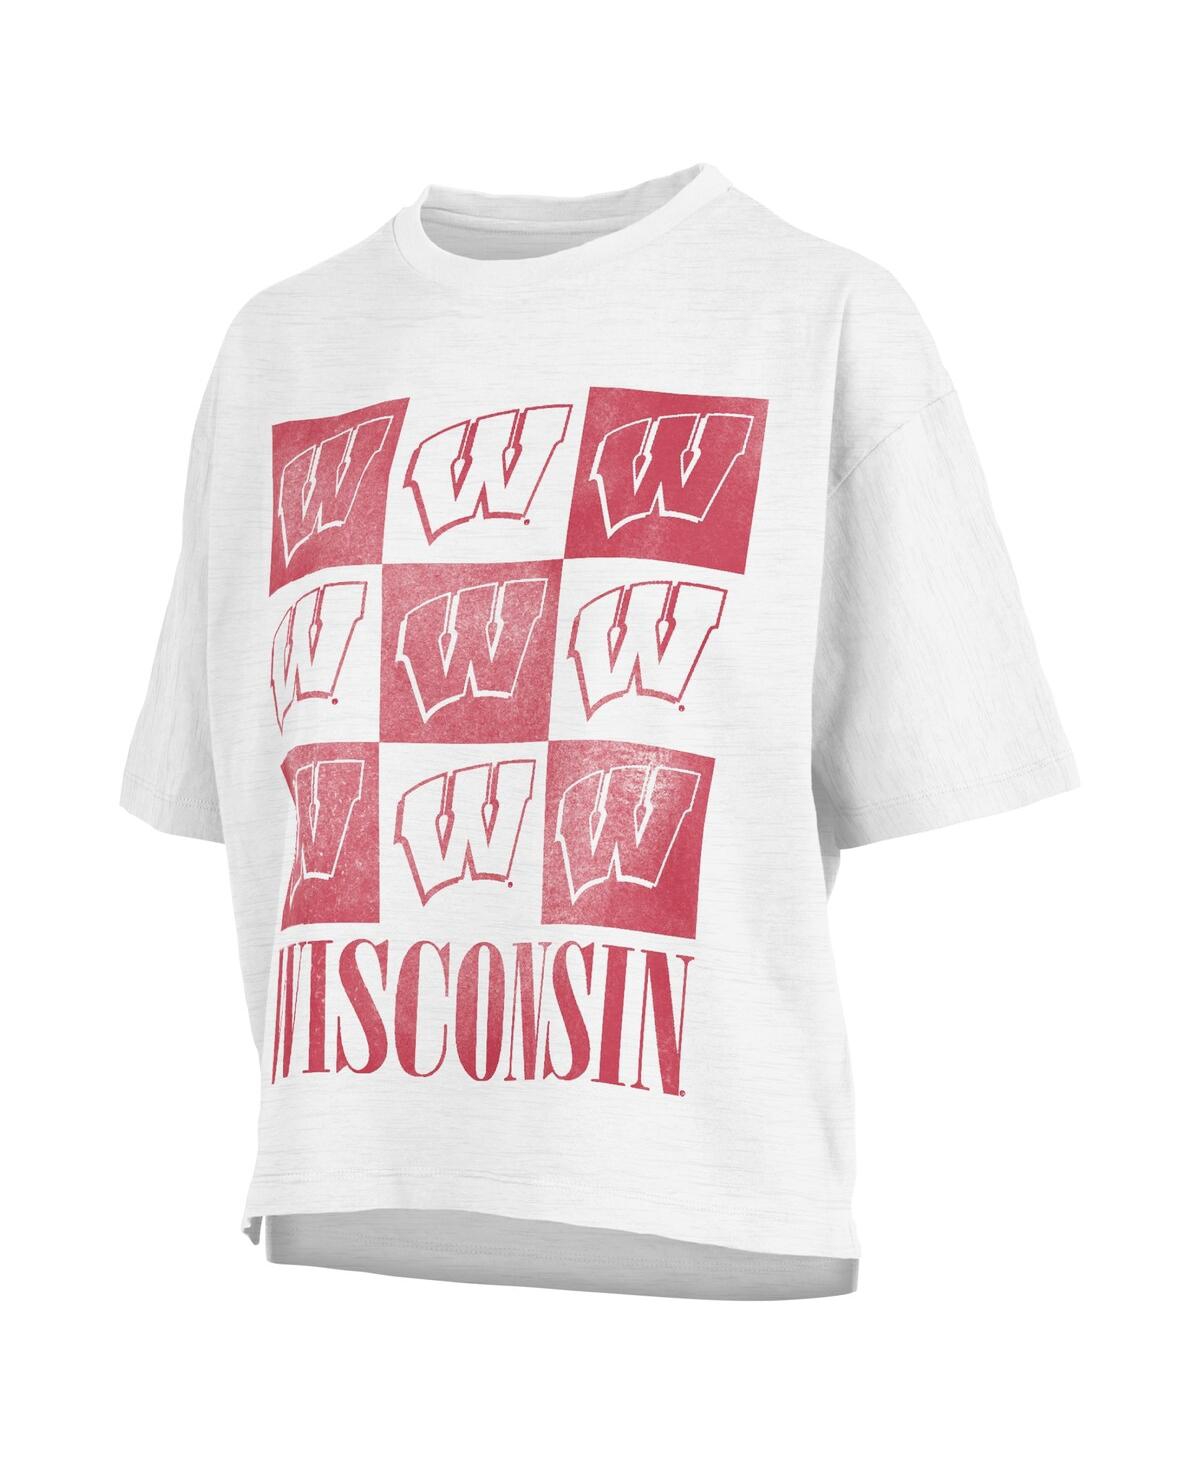 Pressbox Women's  White Distressed Wisconsin Badgers Motley Crew Andy Waist Length Oversized T-shirt